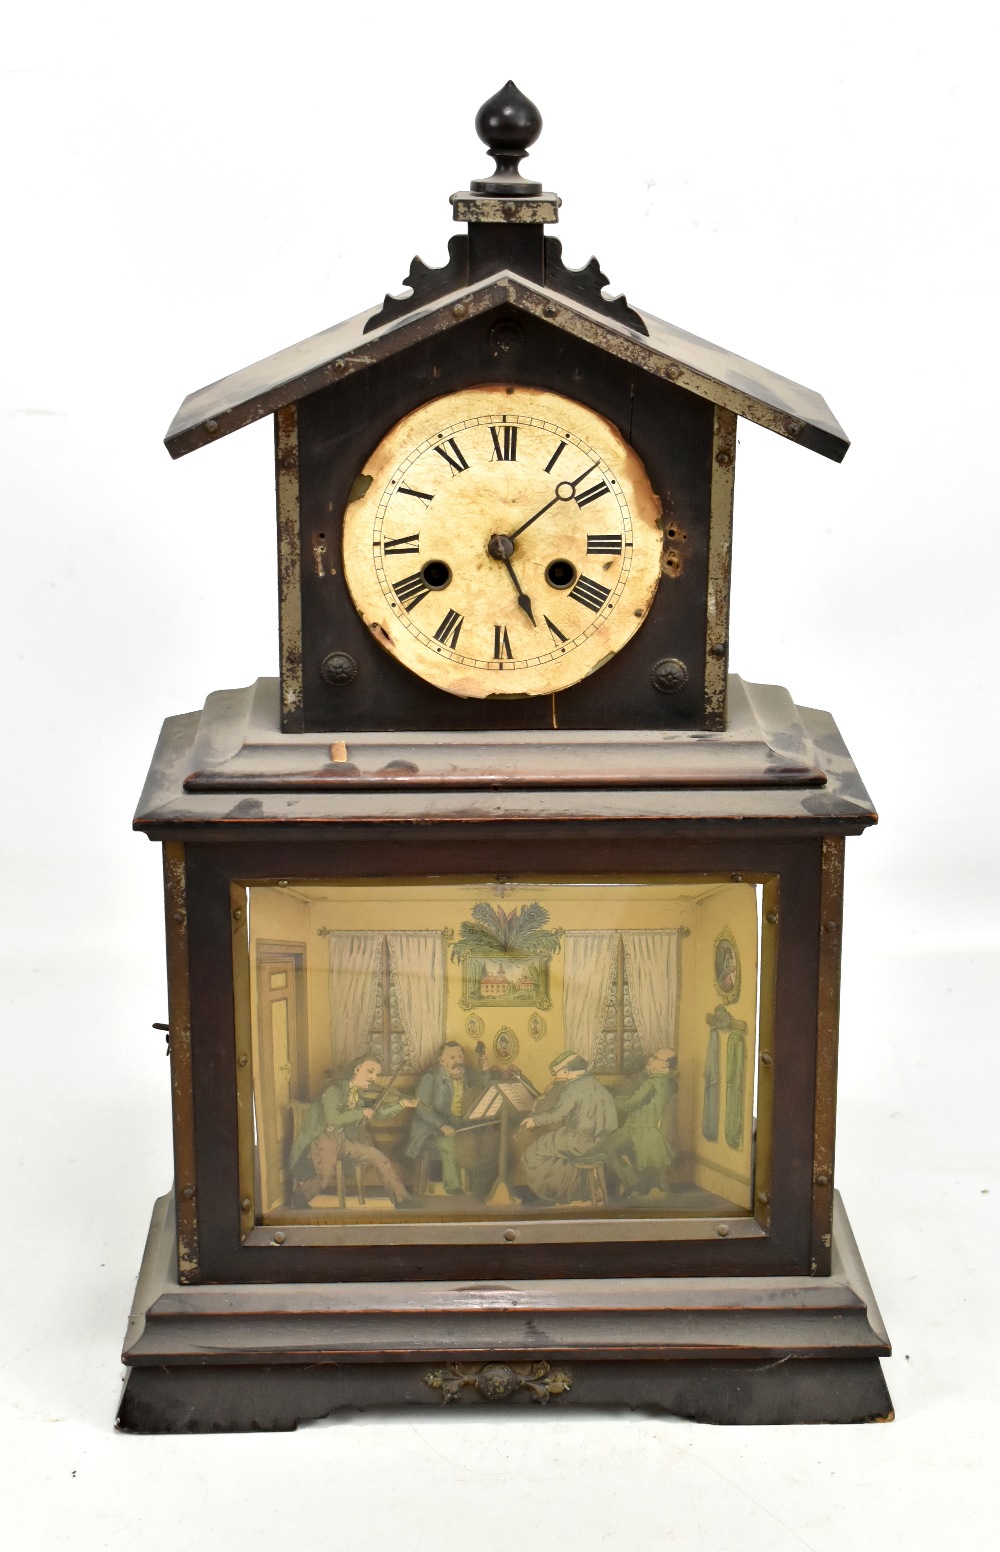 A late 19th century German automaton mantel clock with simple movement, applied paper dial and